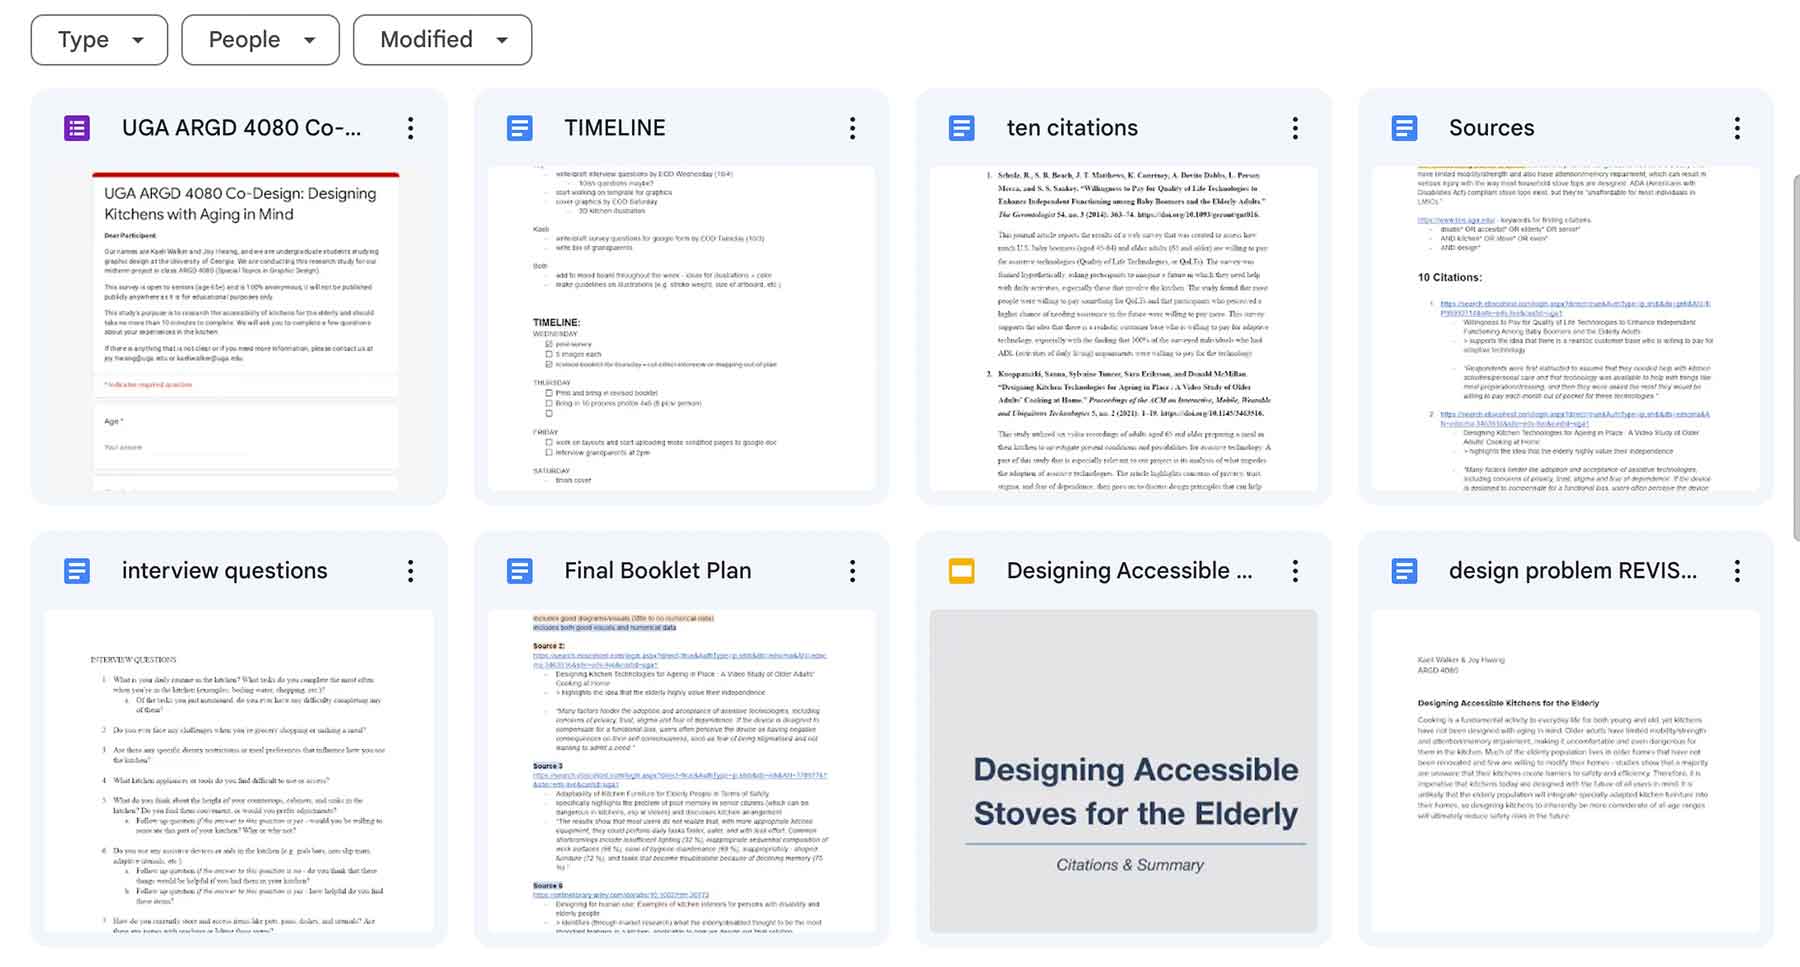 A folder of Google docs made for this research.